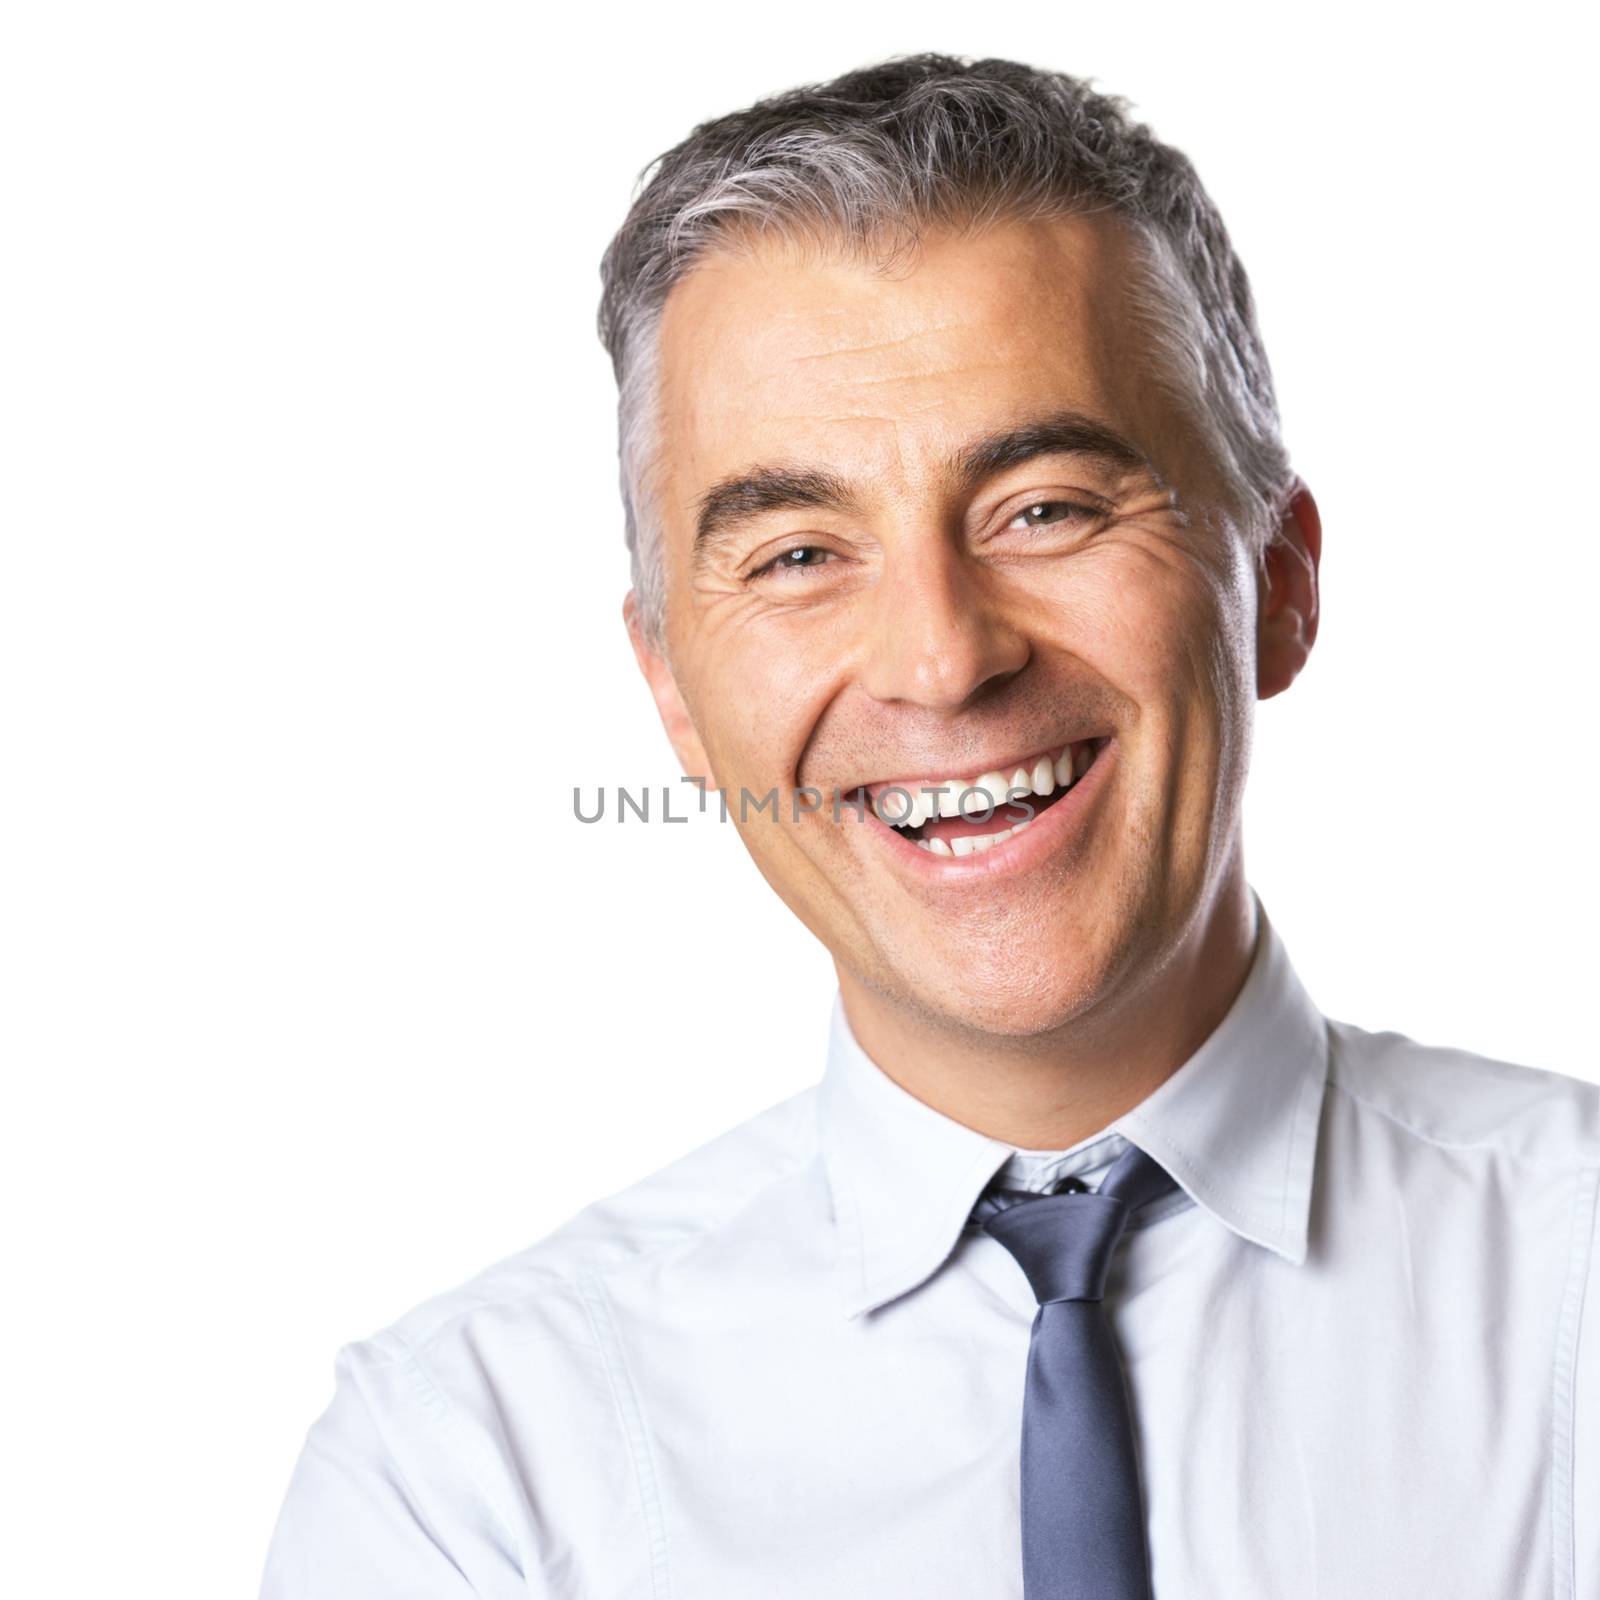 Smiling mature businessman in white shirt and tie looking at camera on white background.